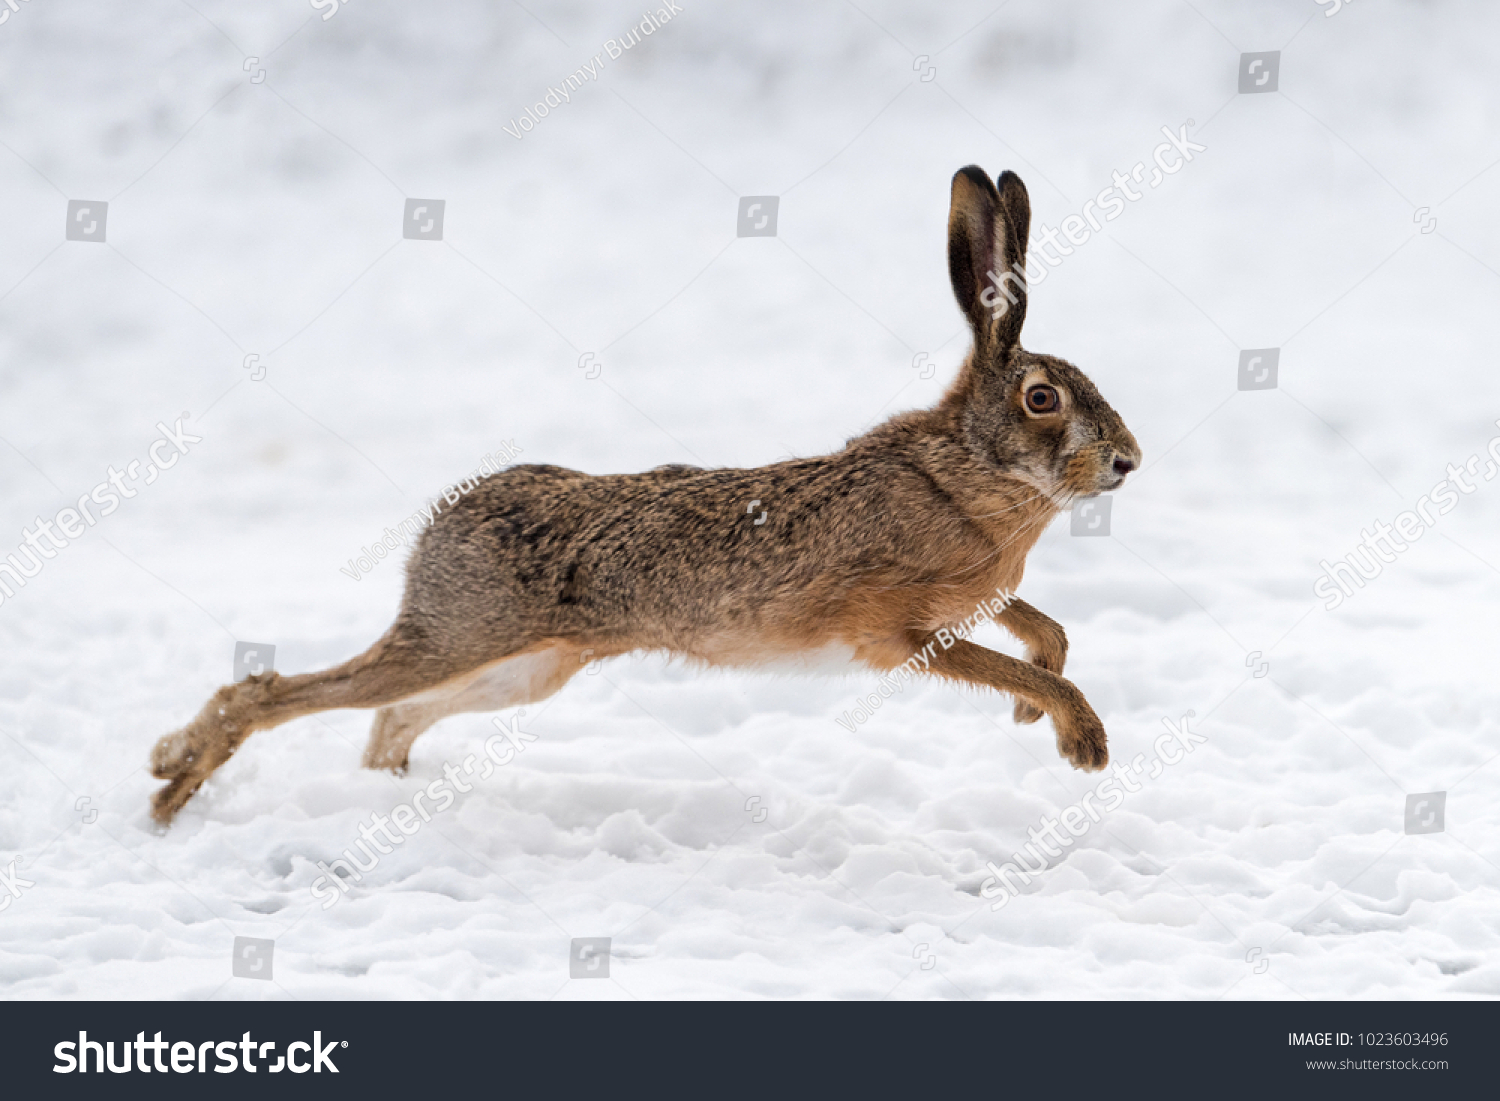 Hare running in the winter field #1023603496